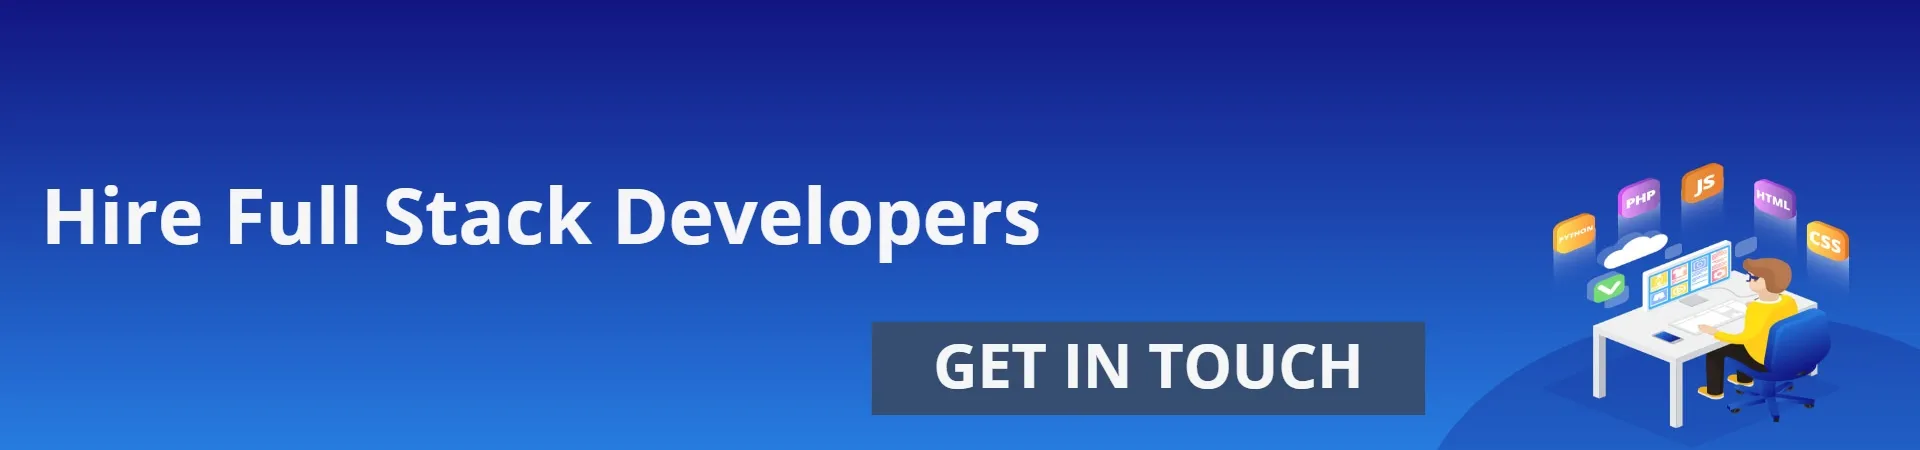 Rlogical Techsoft - Hire Full Stack Developers